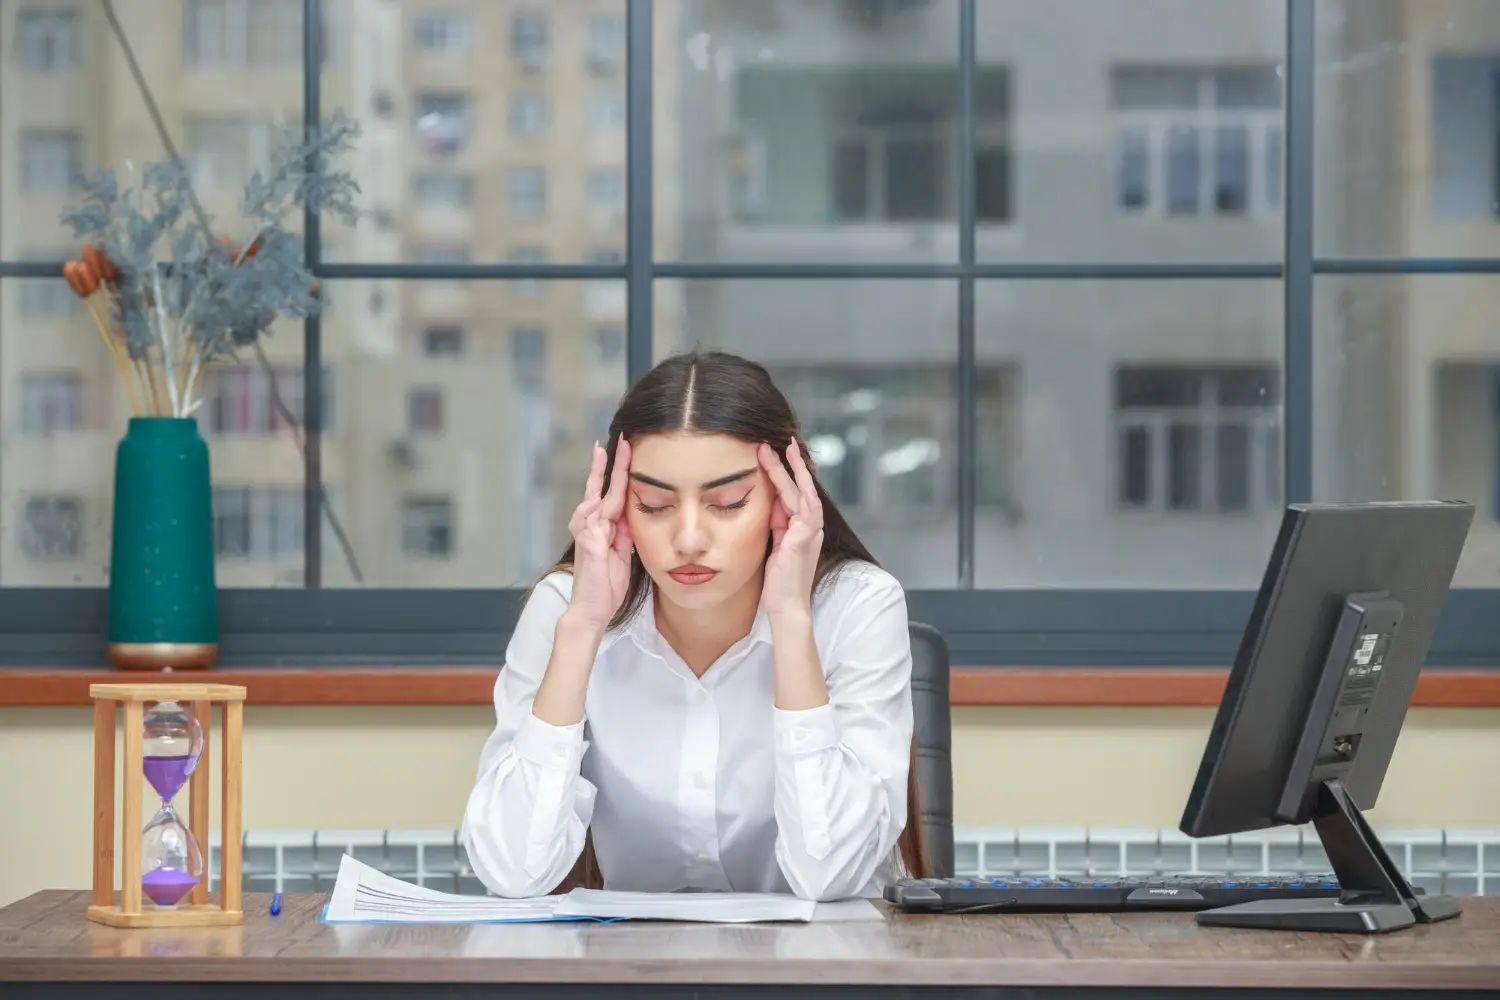 Headache or Migraine? How to Recognize, Manage, and Find Relief